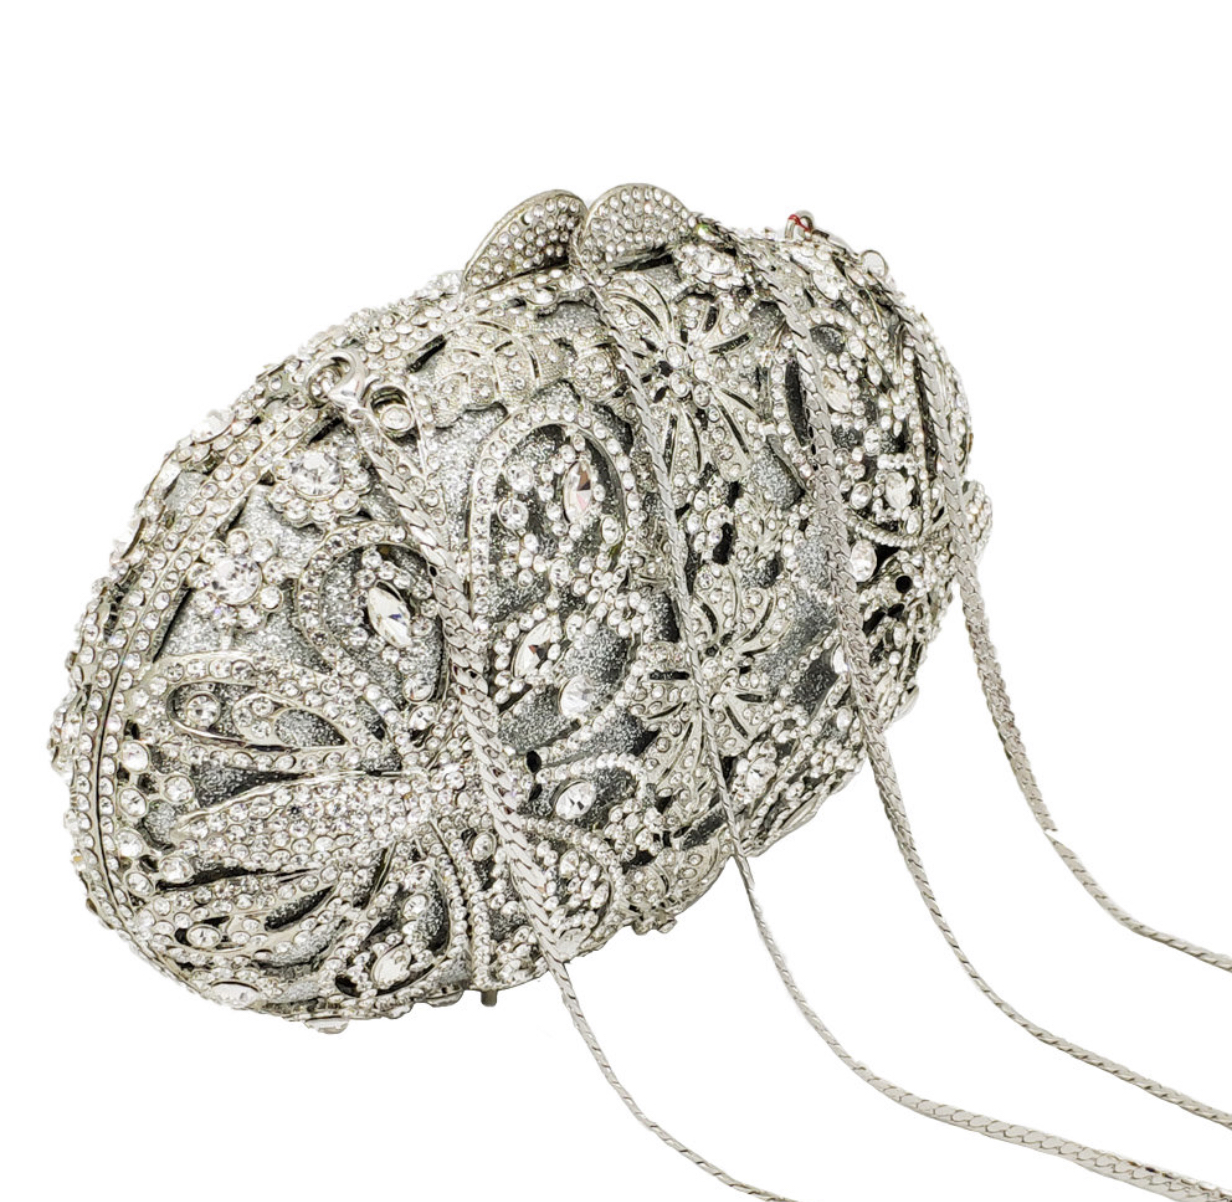 Amazing Bridal Clutches For The Perfect Bride To Be.